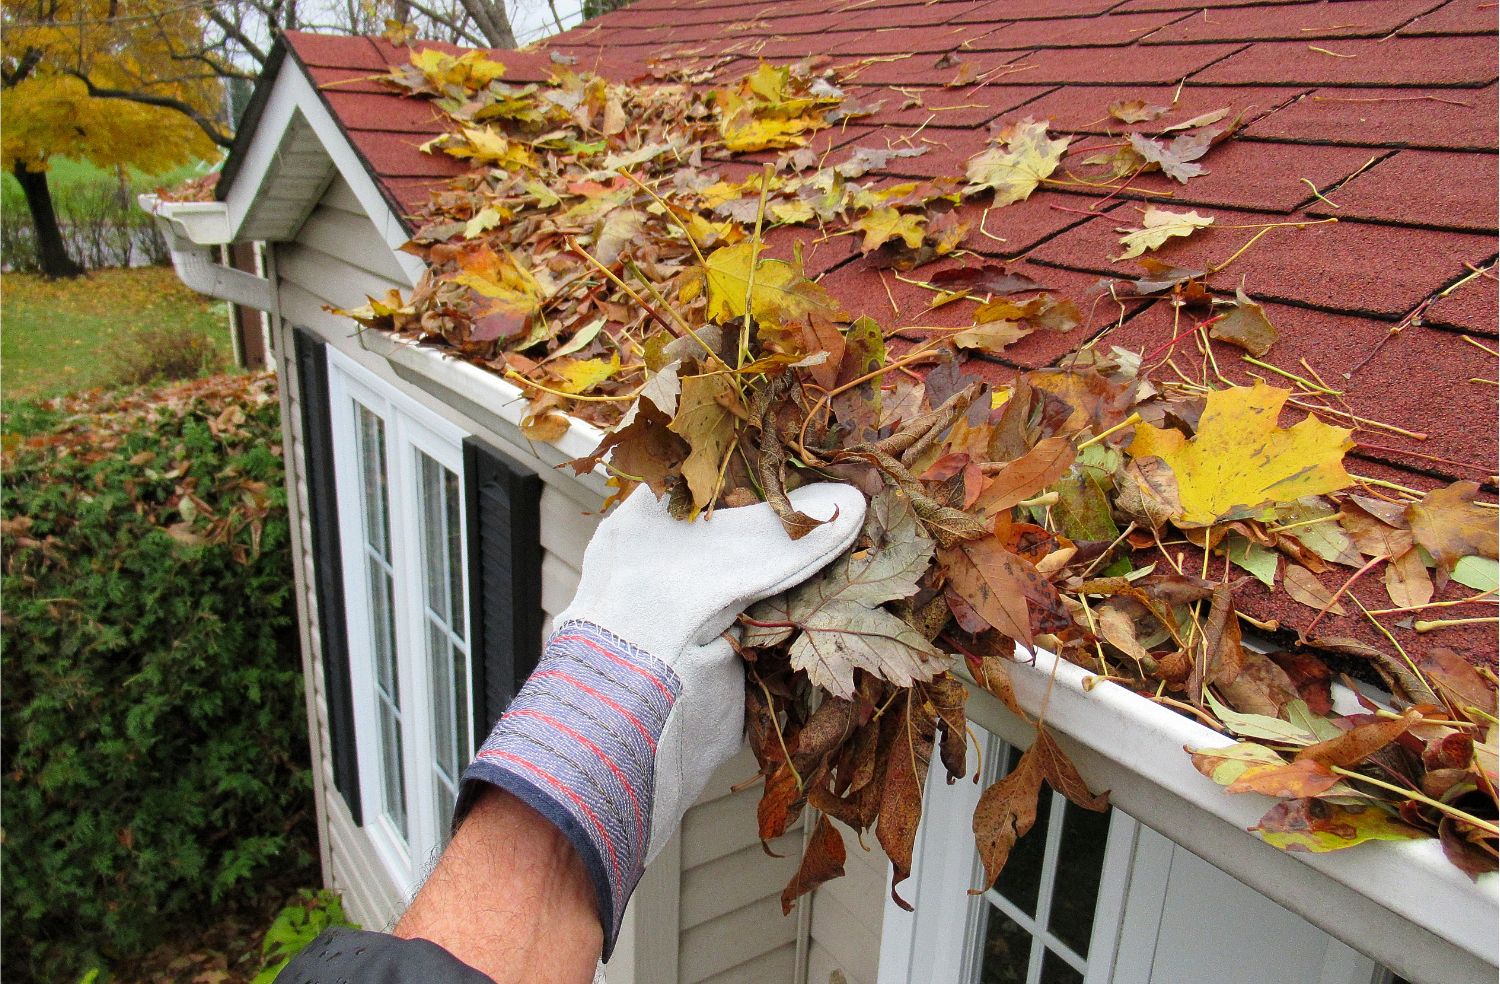 When the gutters are neglected, they can lead to water damage, a leaky roof, a damaged foundation, and other serious and expensive structural issues